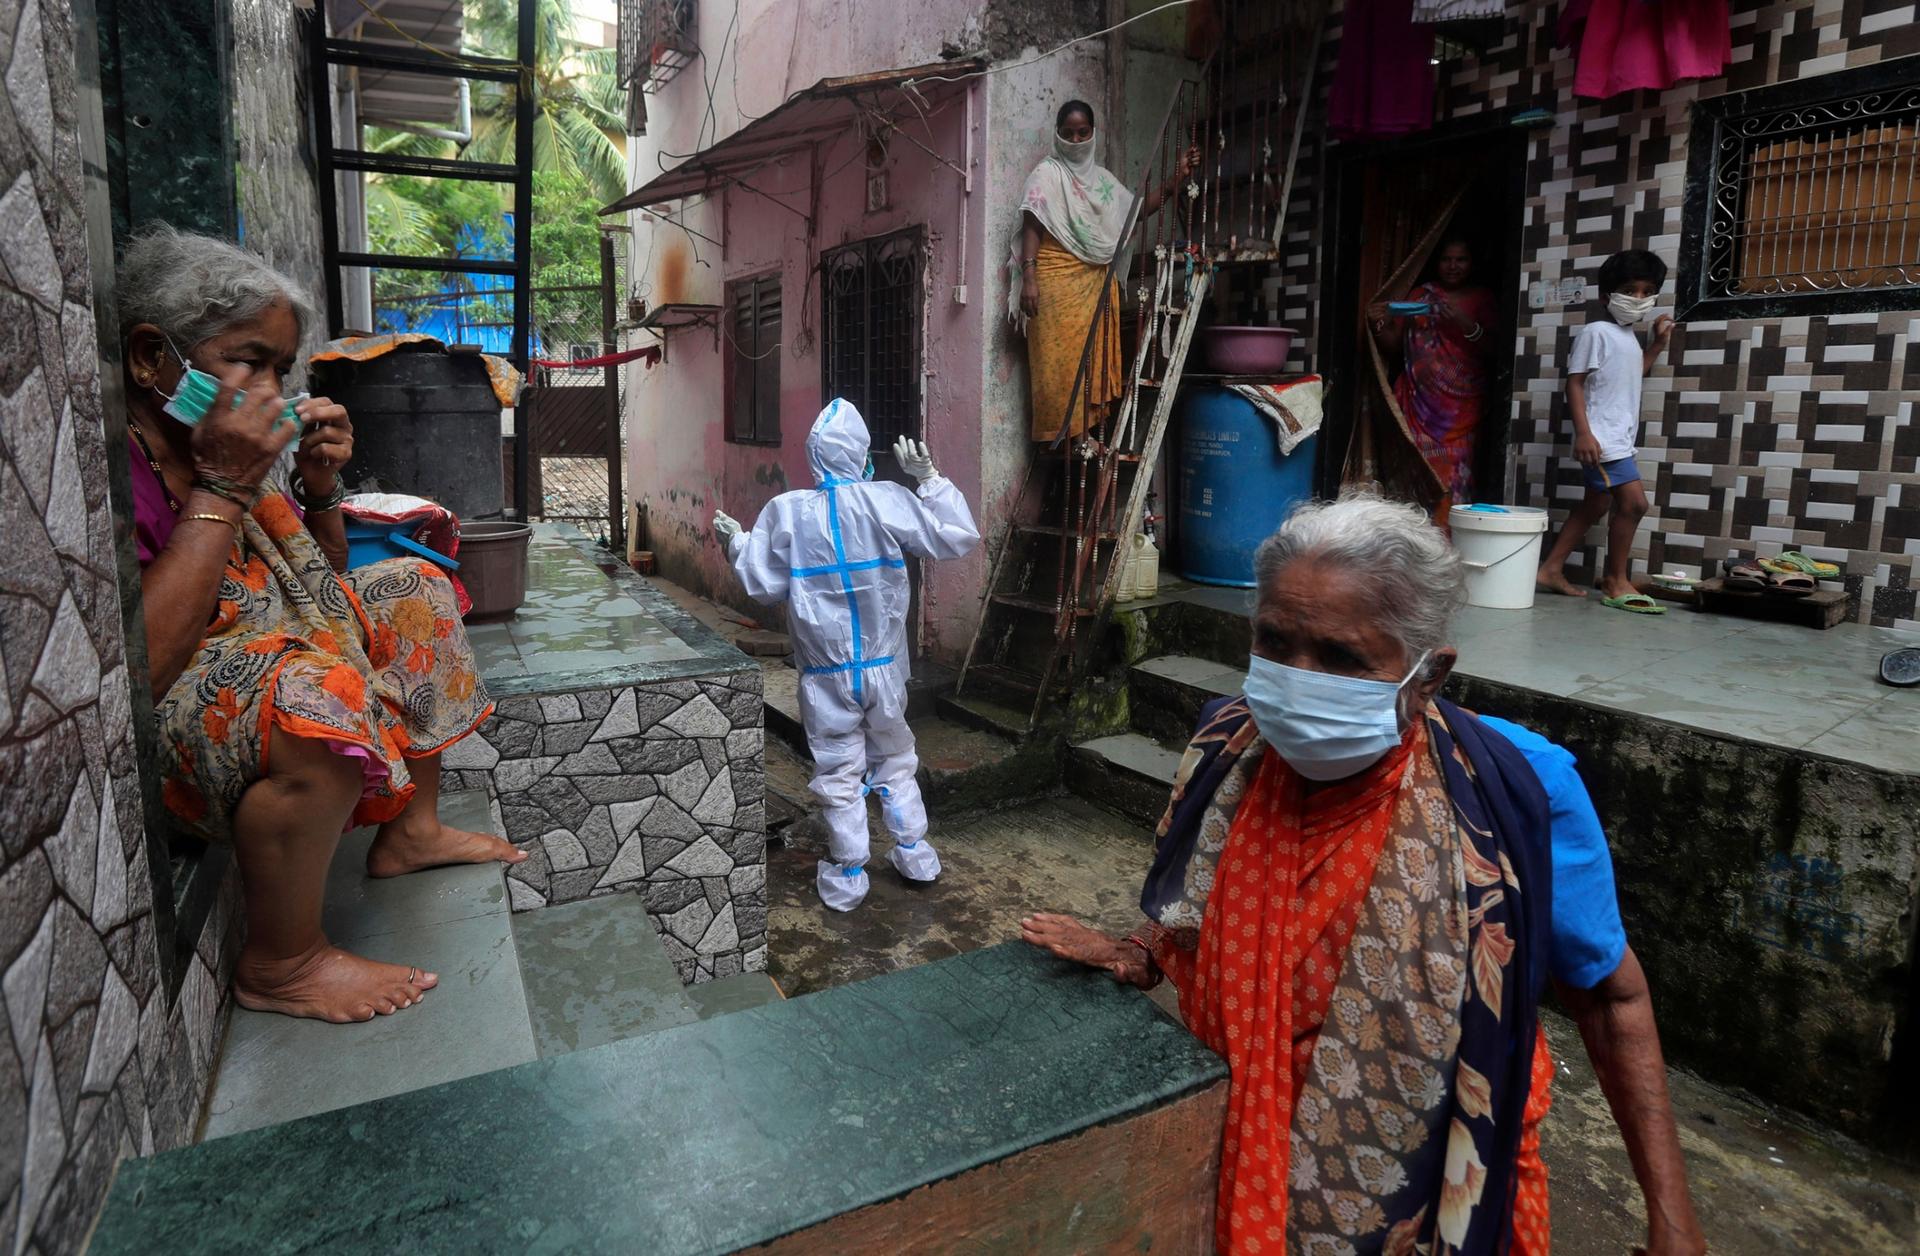 Several people are shown wearing brightly color saris with a peron center frame wearing a full protective medical outfit.